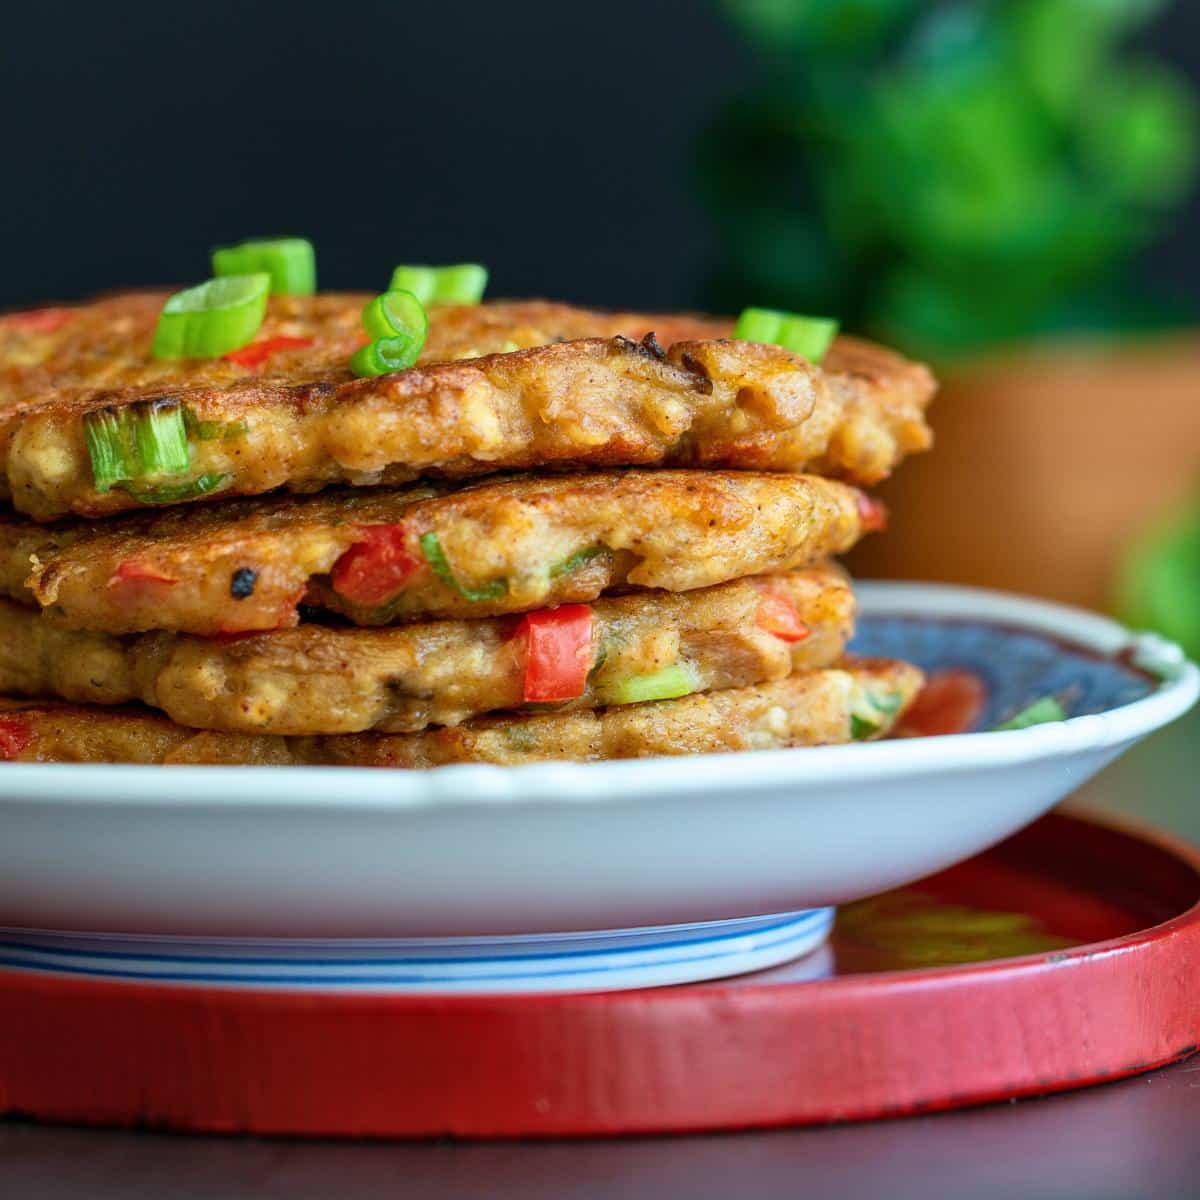 4 vegetable pancakes stacked on a blue and white Chinese plate, garnished with scallions. 